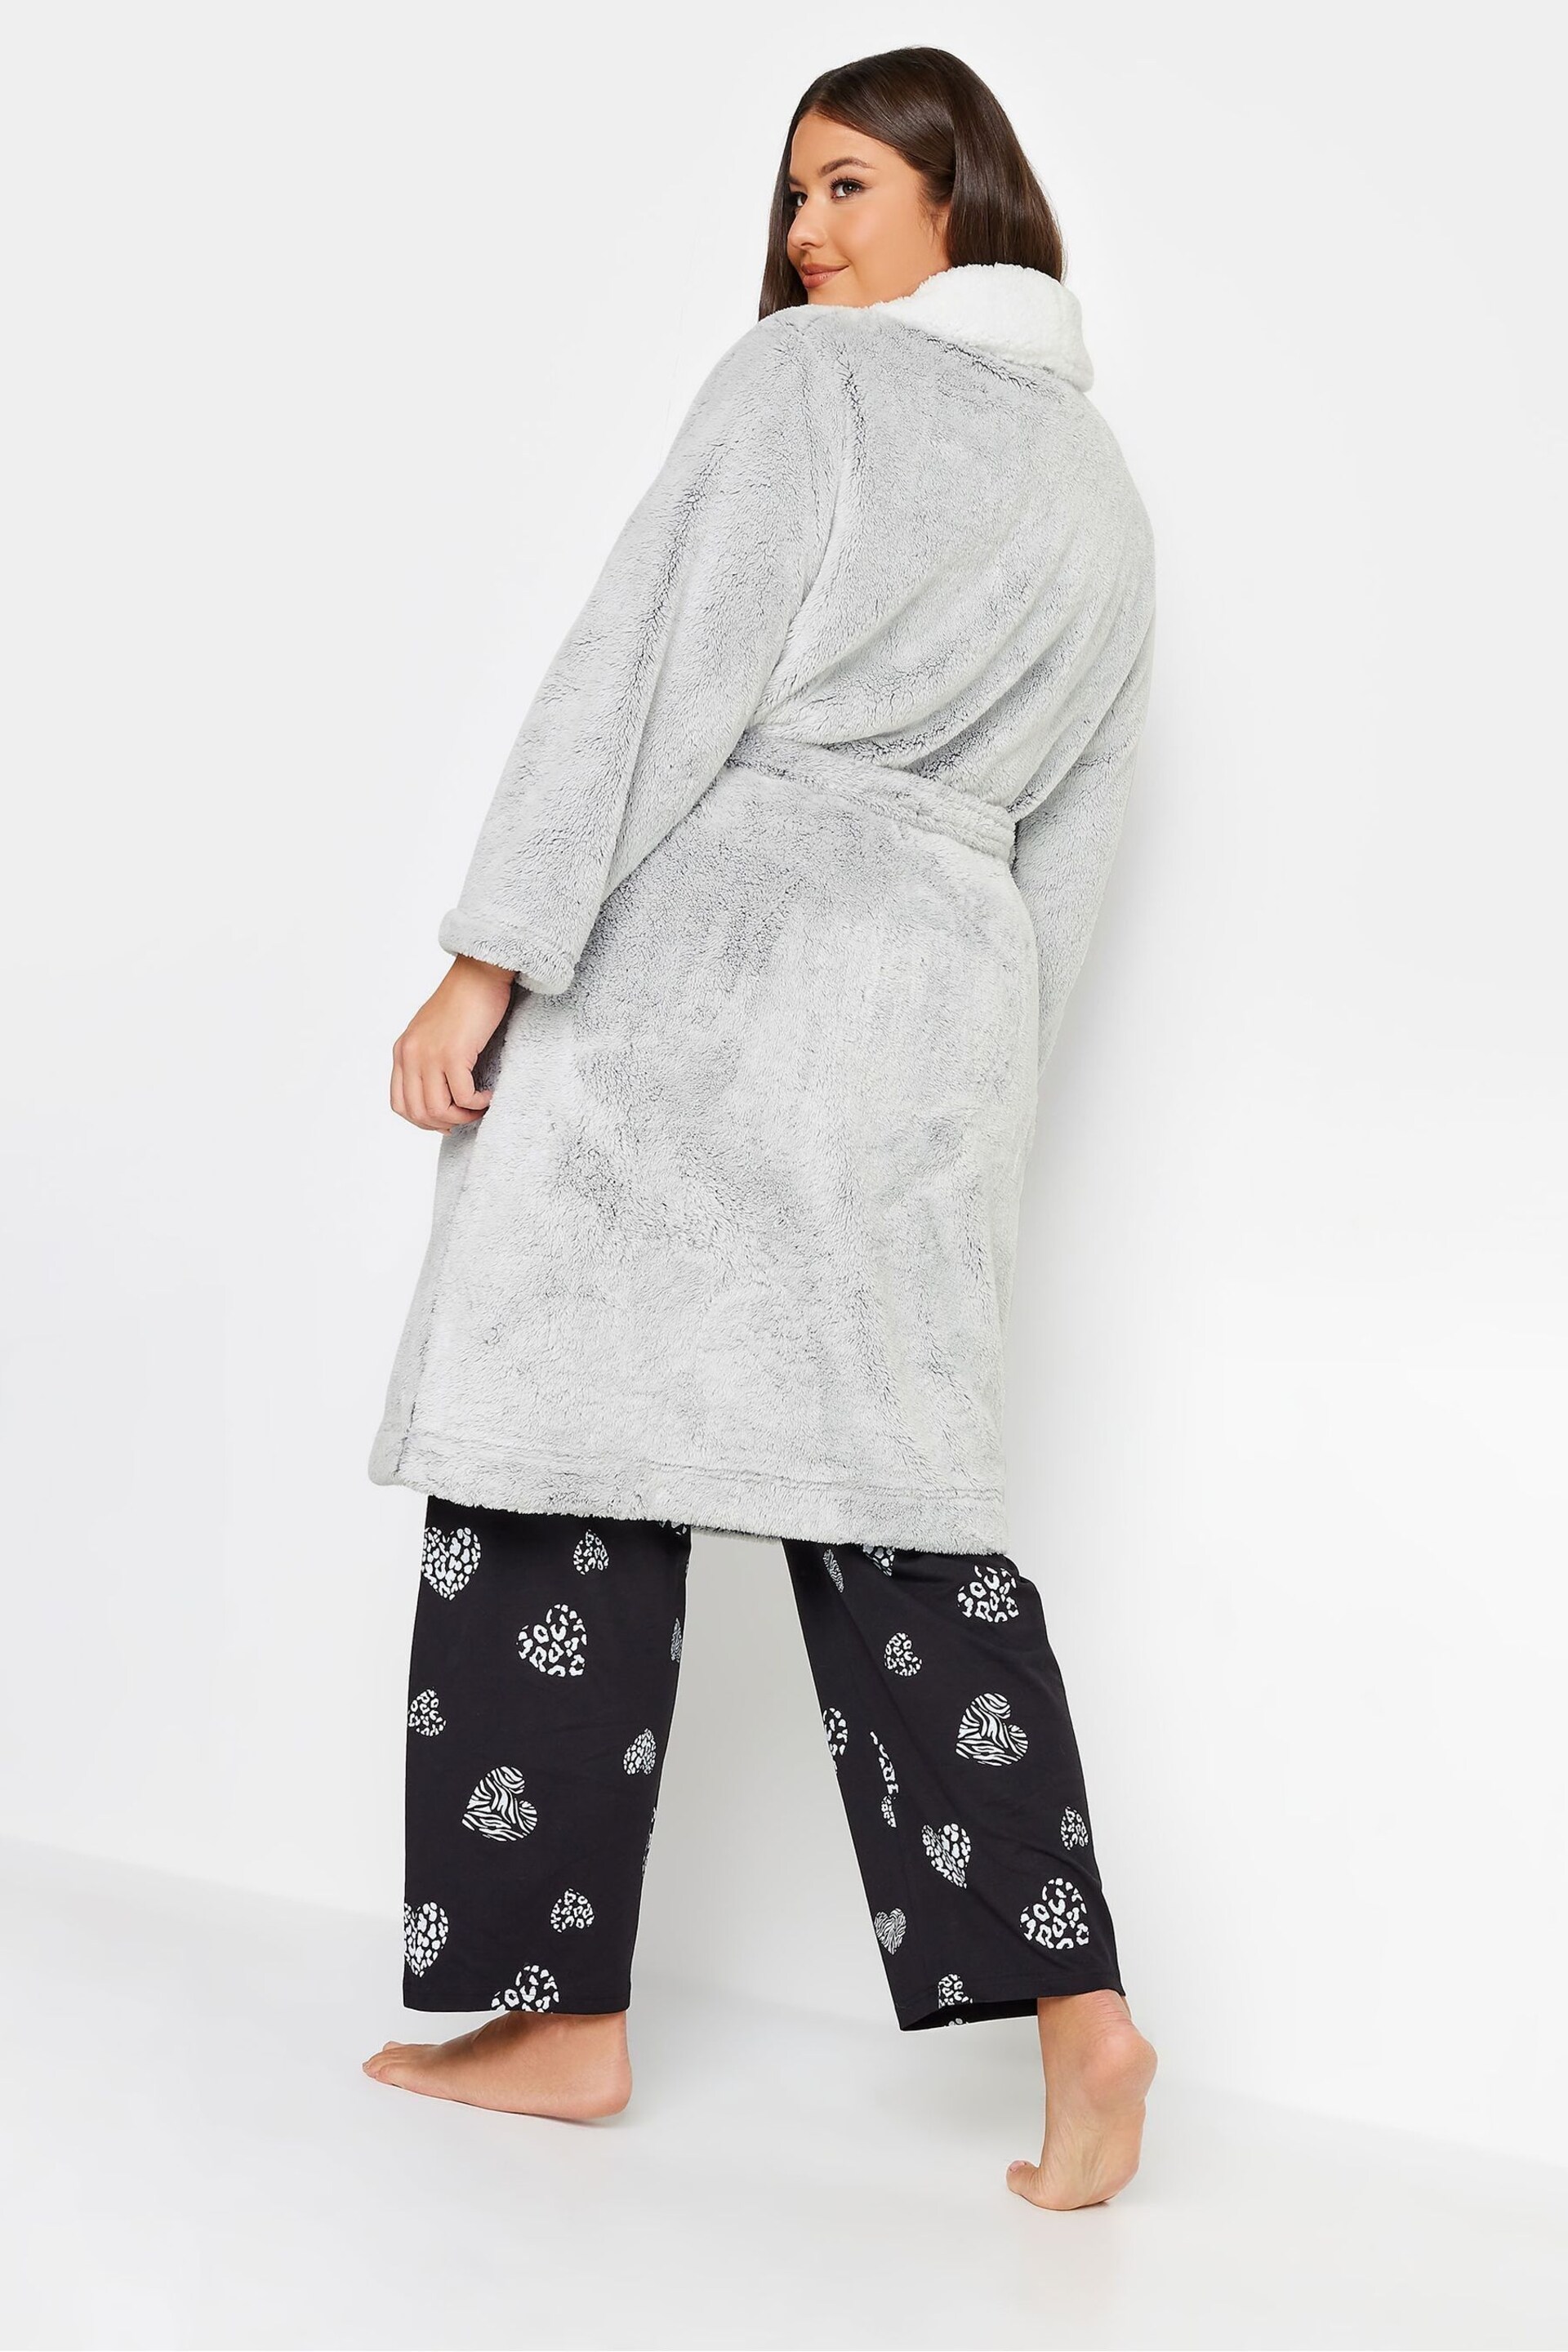 Yours Curve Grey Wellsoft Contrast Shawl Collar Robe - Image 2 of 4